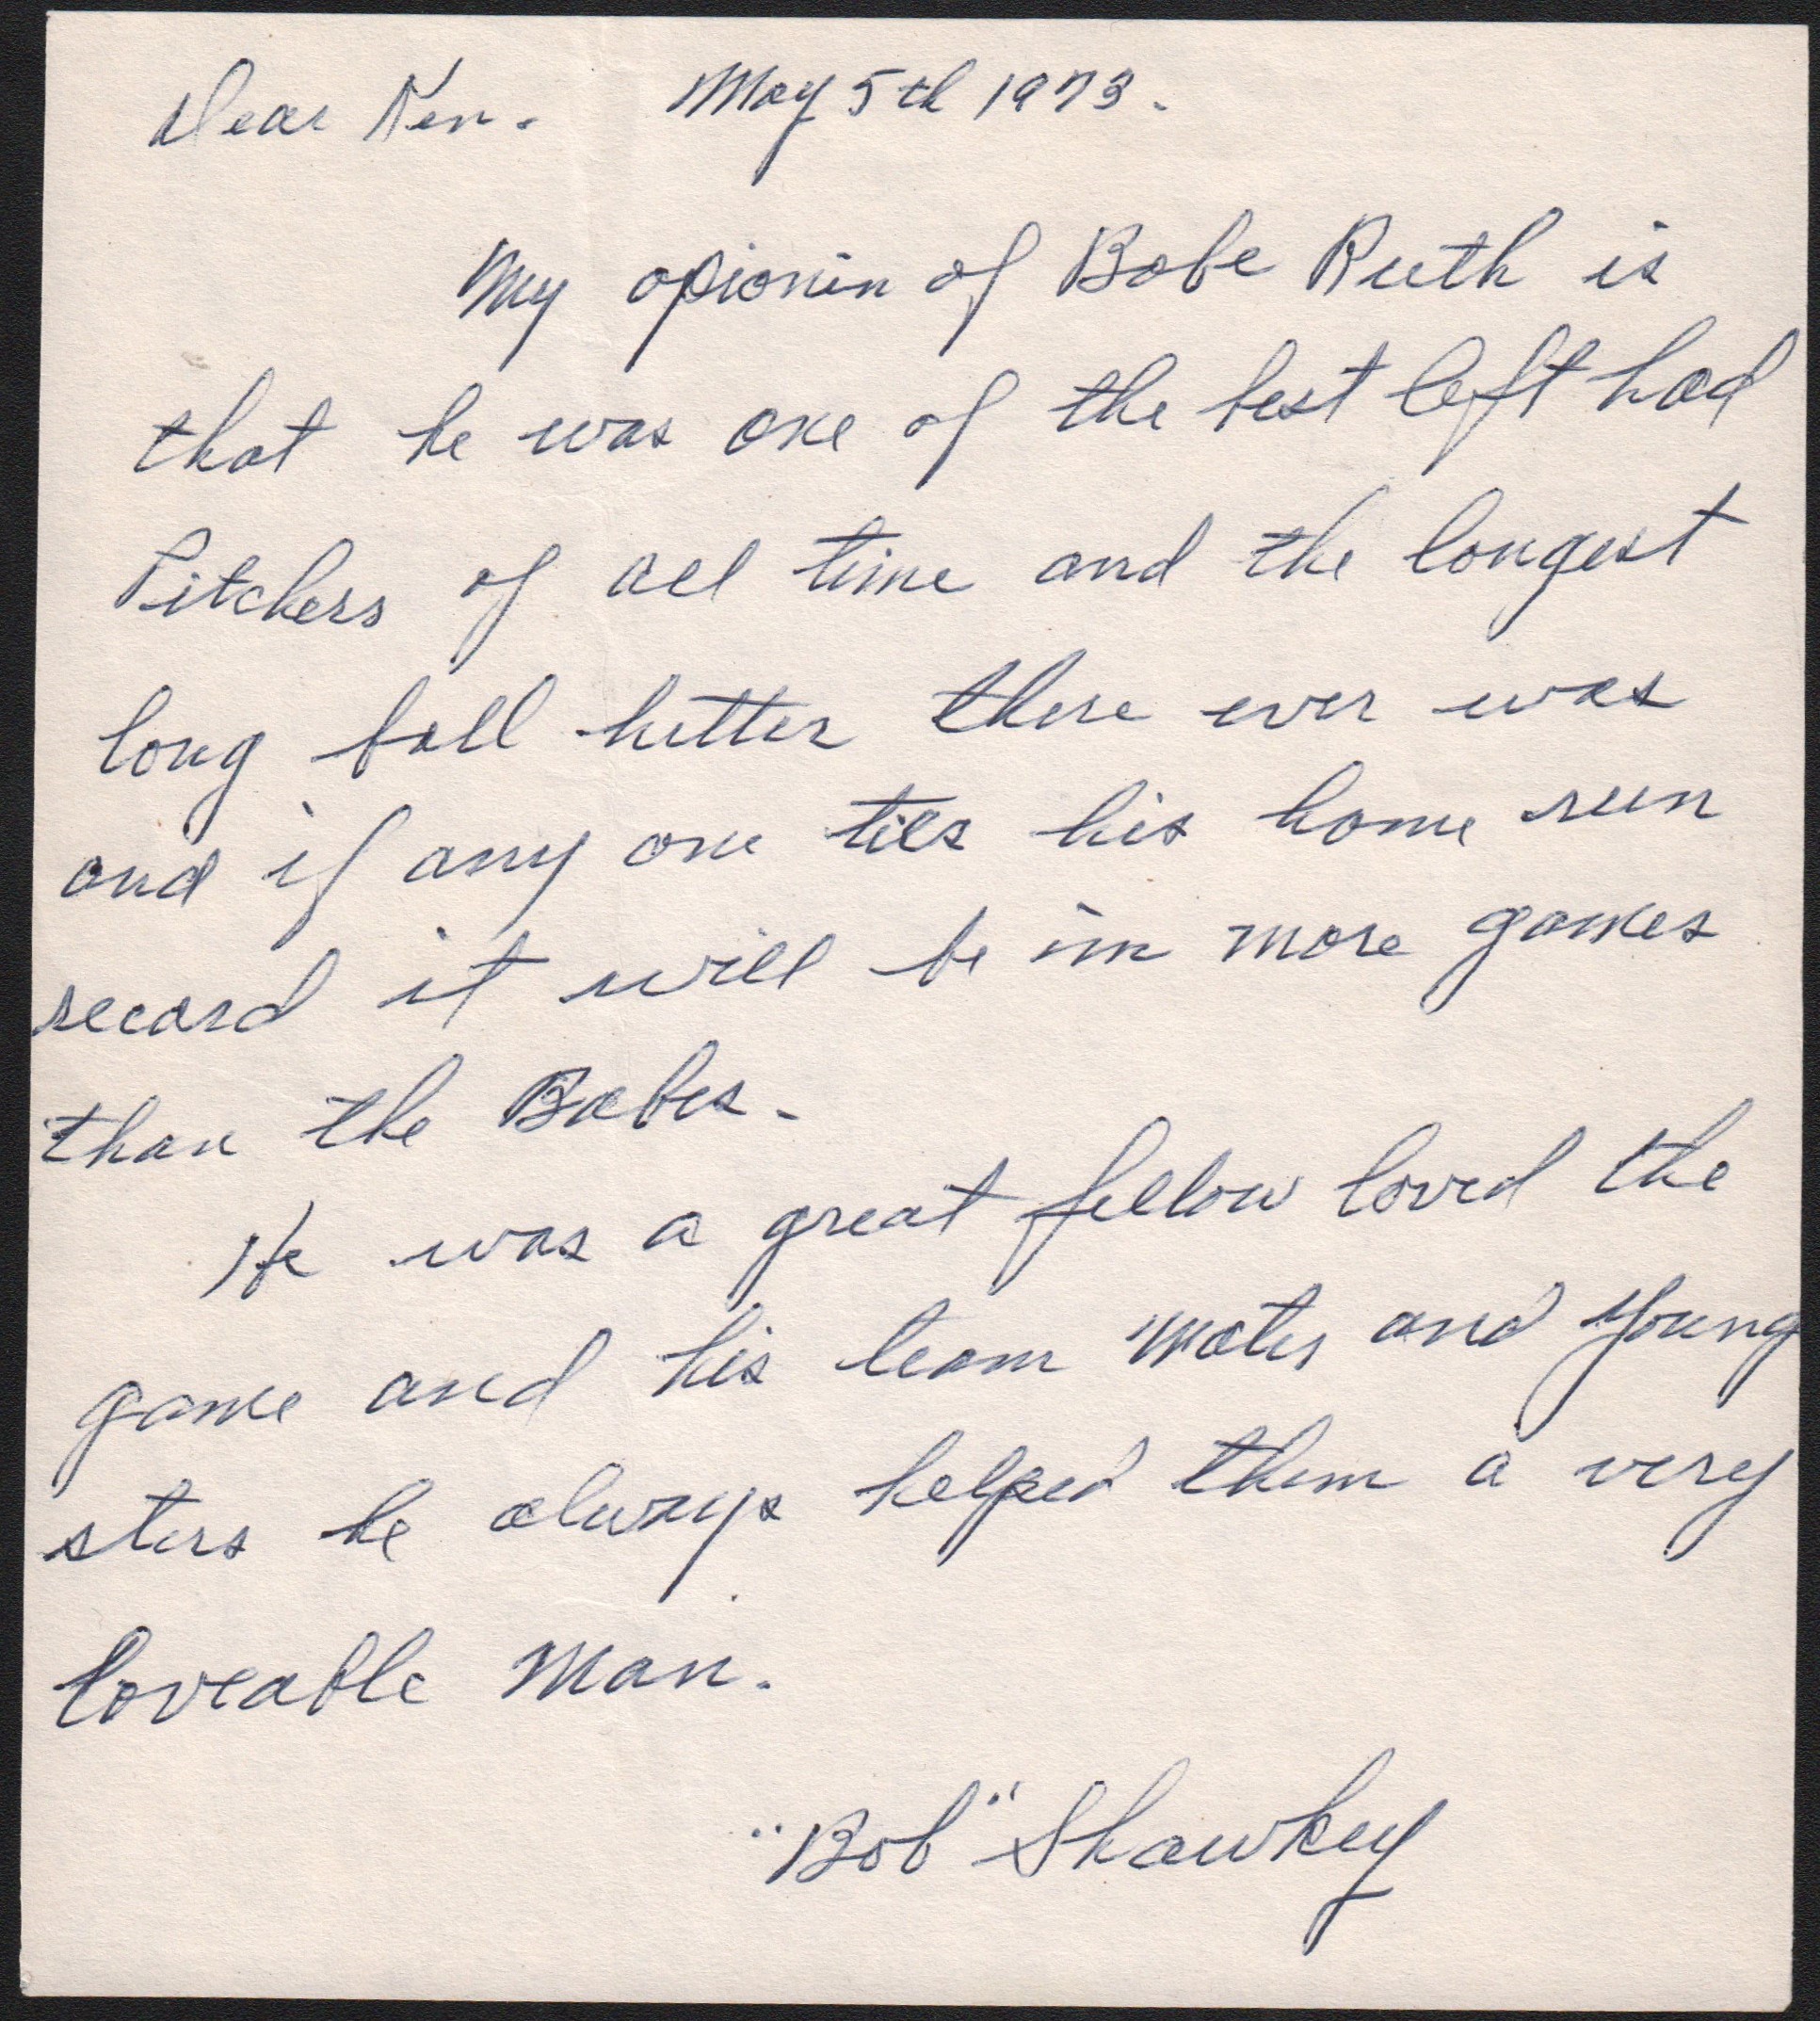 Baseball Autographs - Bob Shawkey 1-Page Handwritten Letter w/Ruth Content